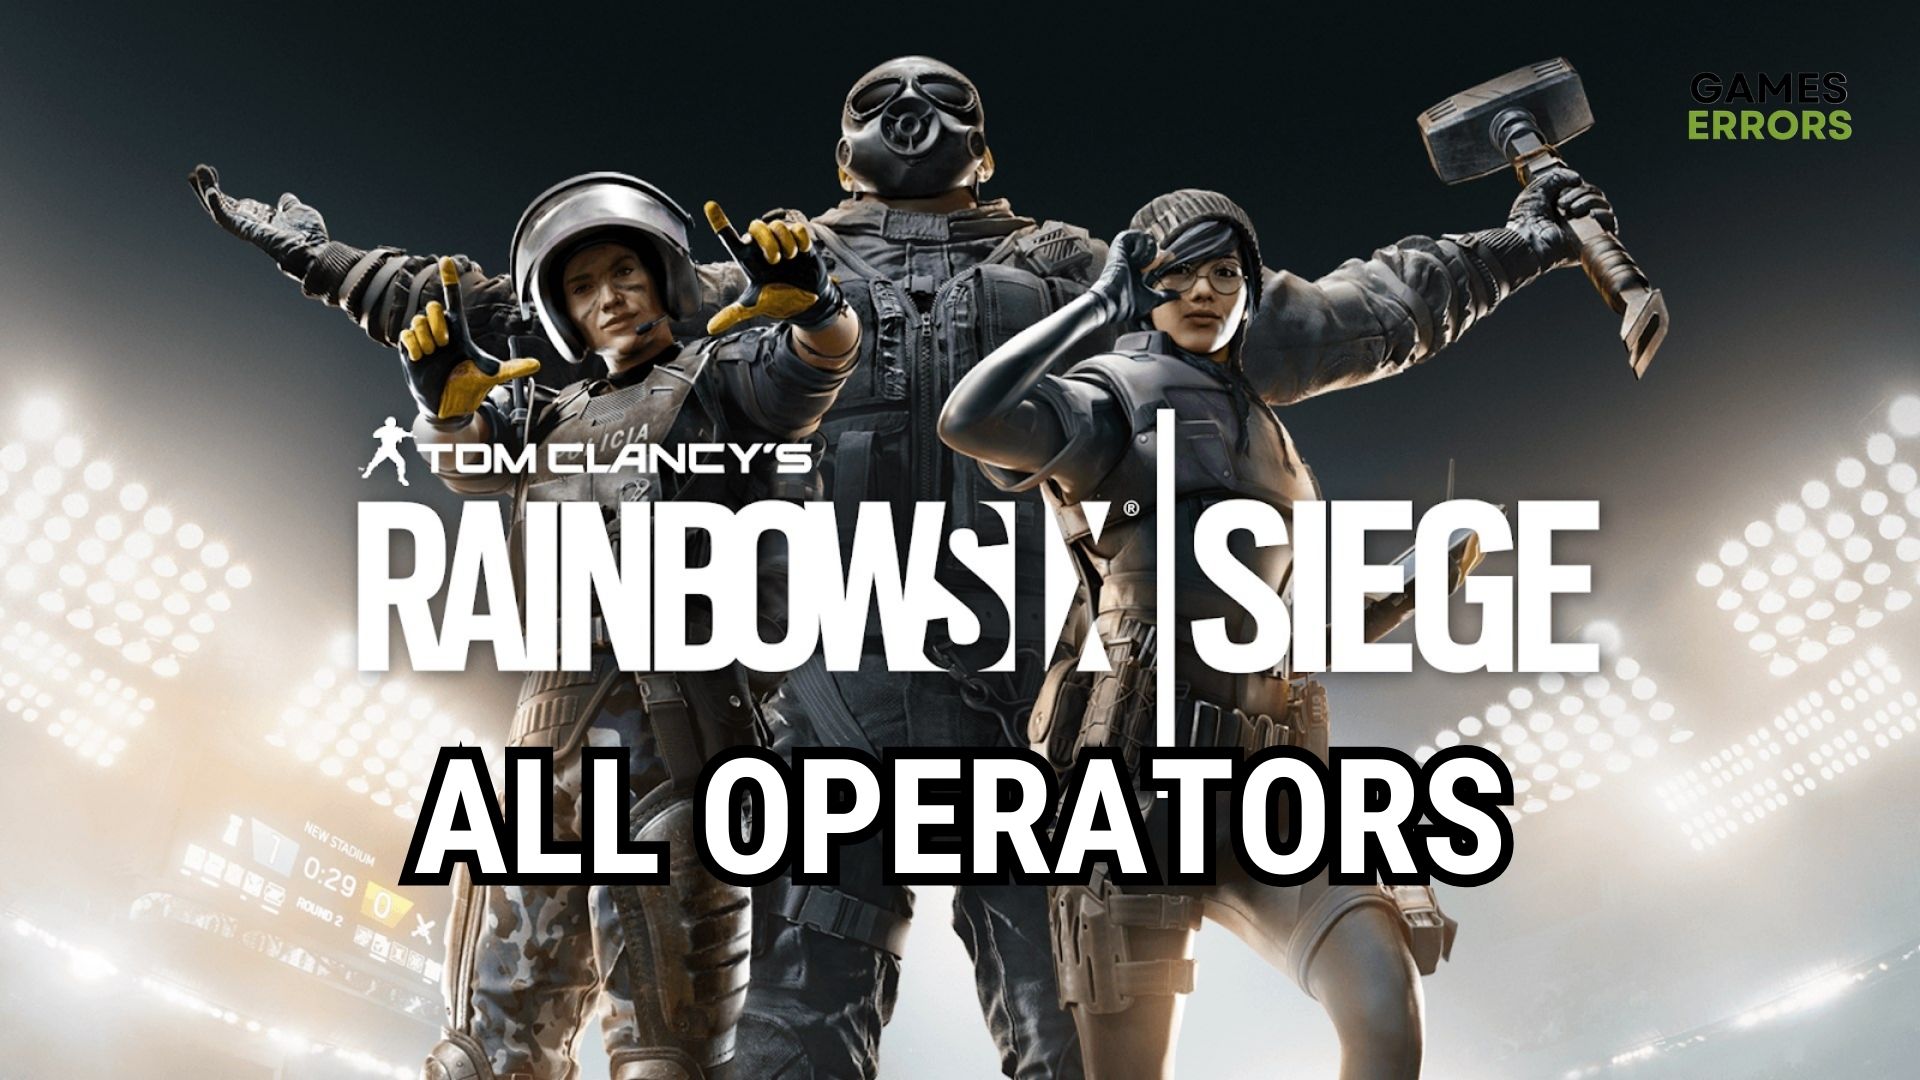 All R6 Operators: Check Their Backgrounds, Abilities & Traits